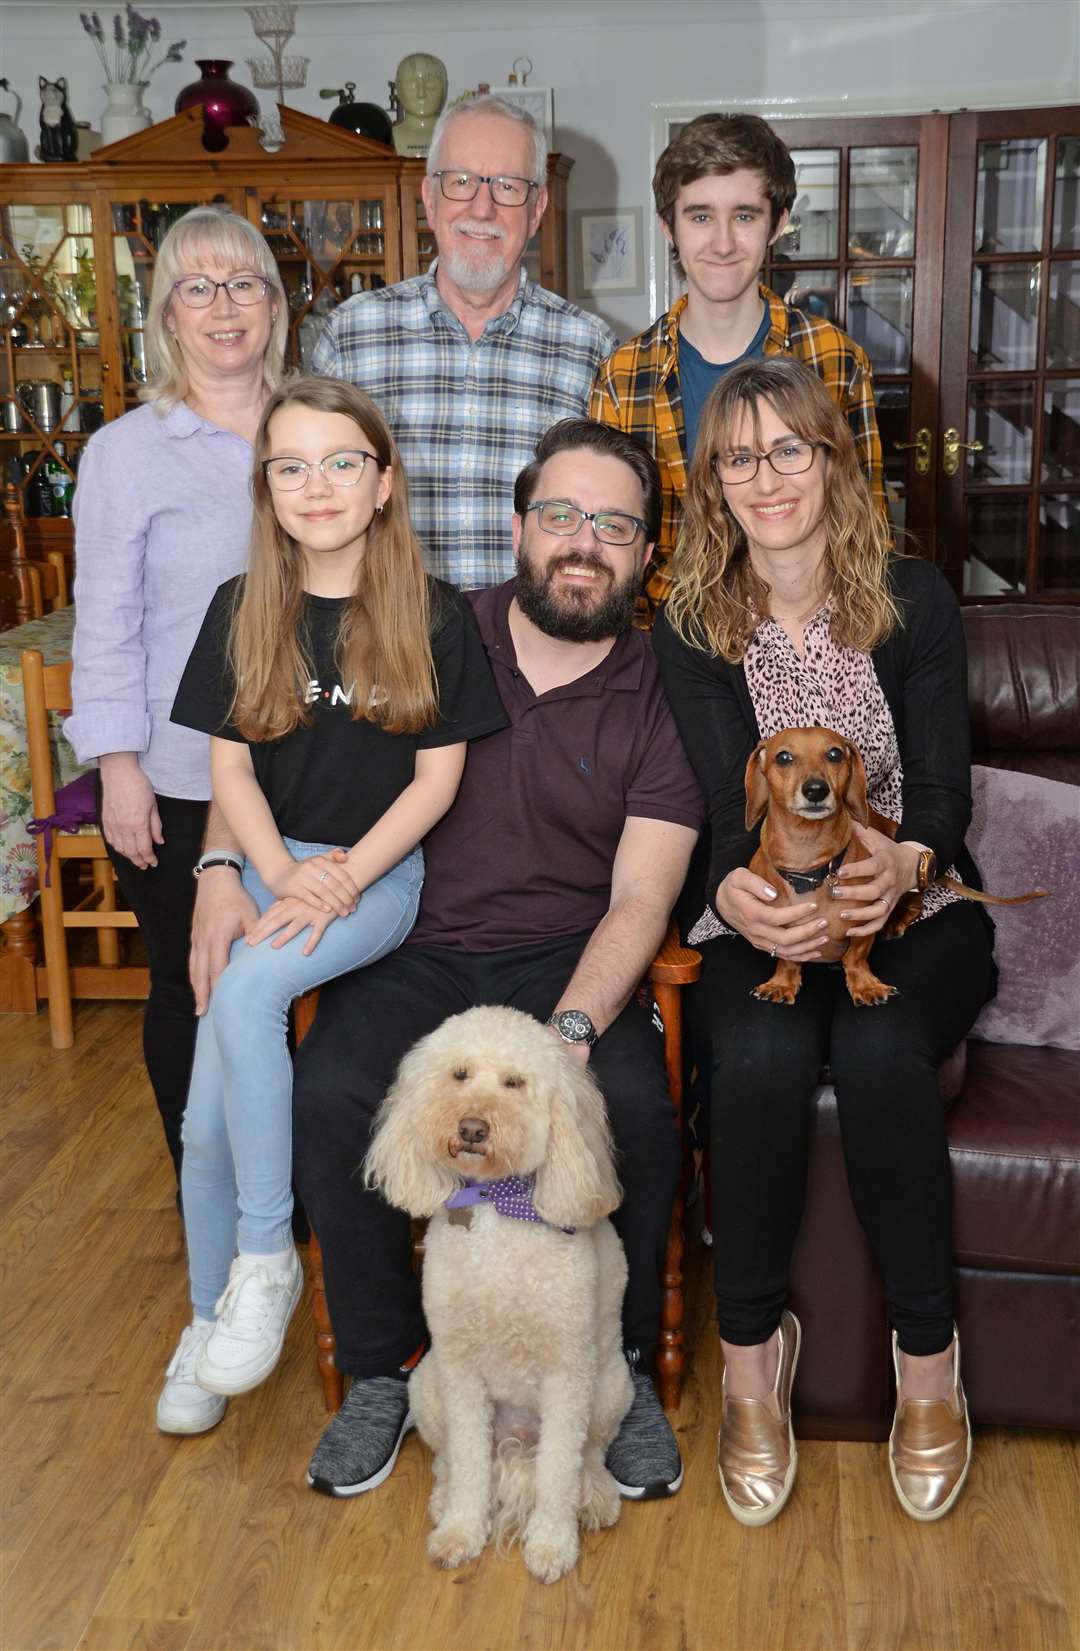 James and Nicole Gavin, their children Norah and Joe and Nicole's parents Carol-Ann and Richard Barrett, not forgetting Herbie the cockerpoo and Frank the dachshund. Picture: Vikki Lince (45400416)